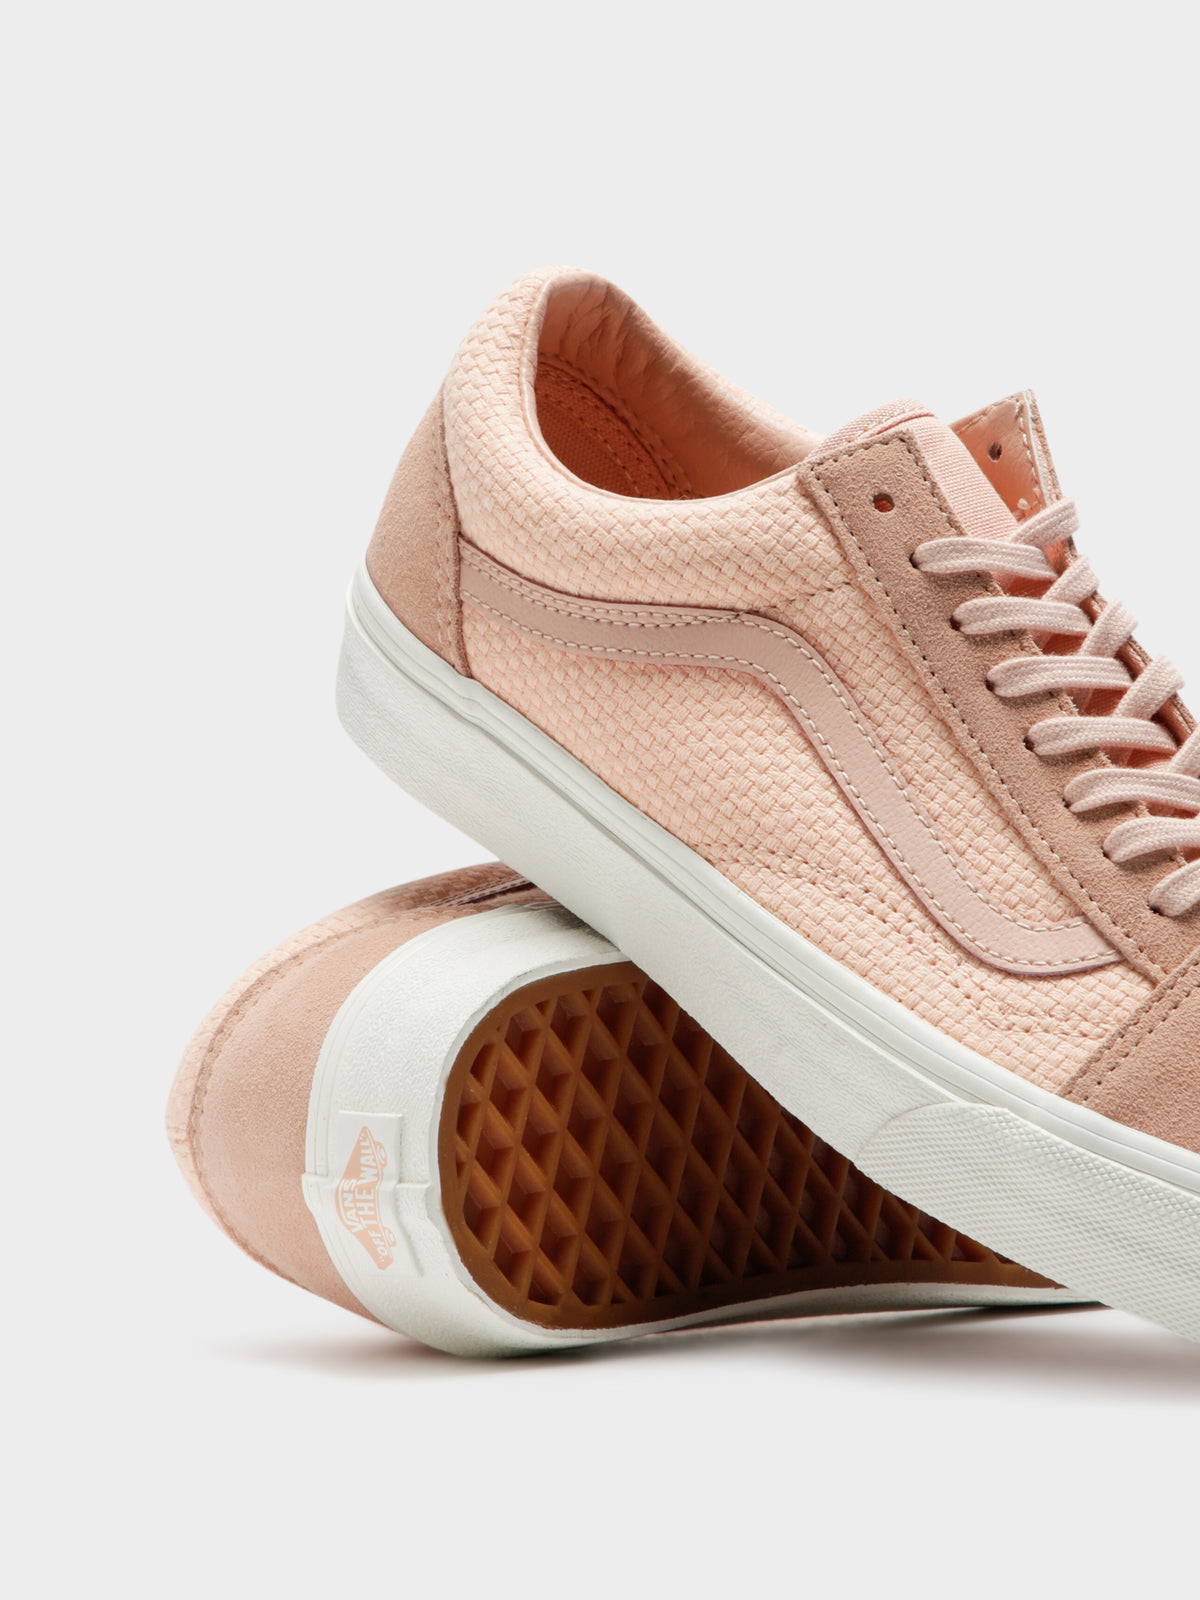 Unisex Woven Check Old Skool Sneakers in Pink and White